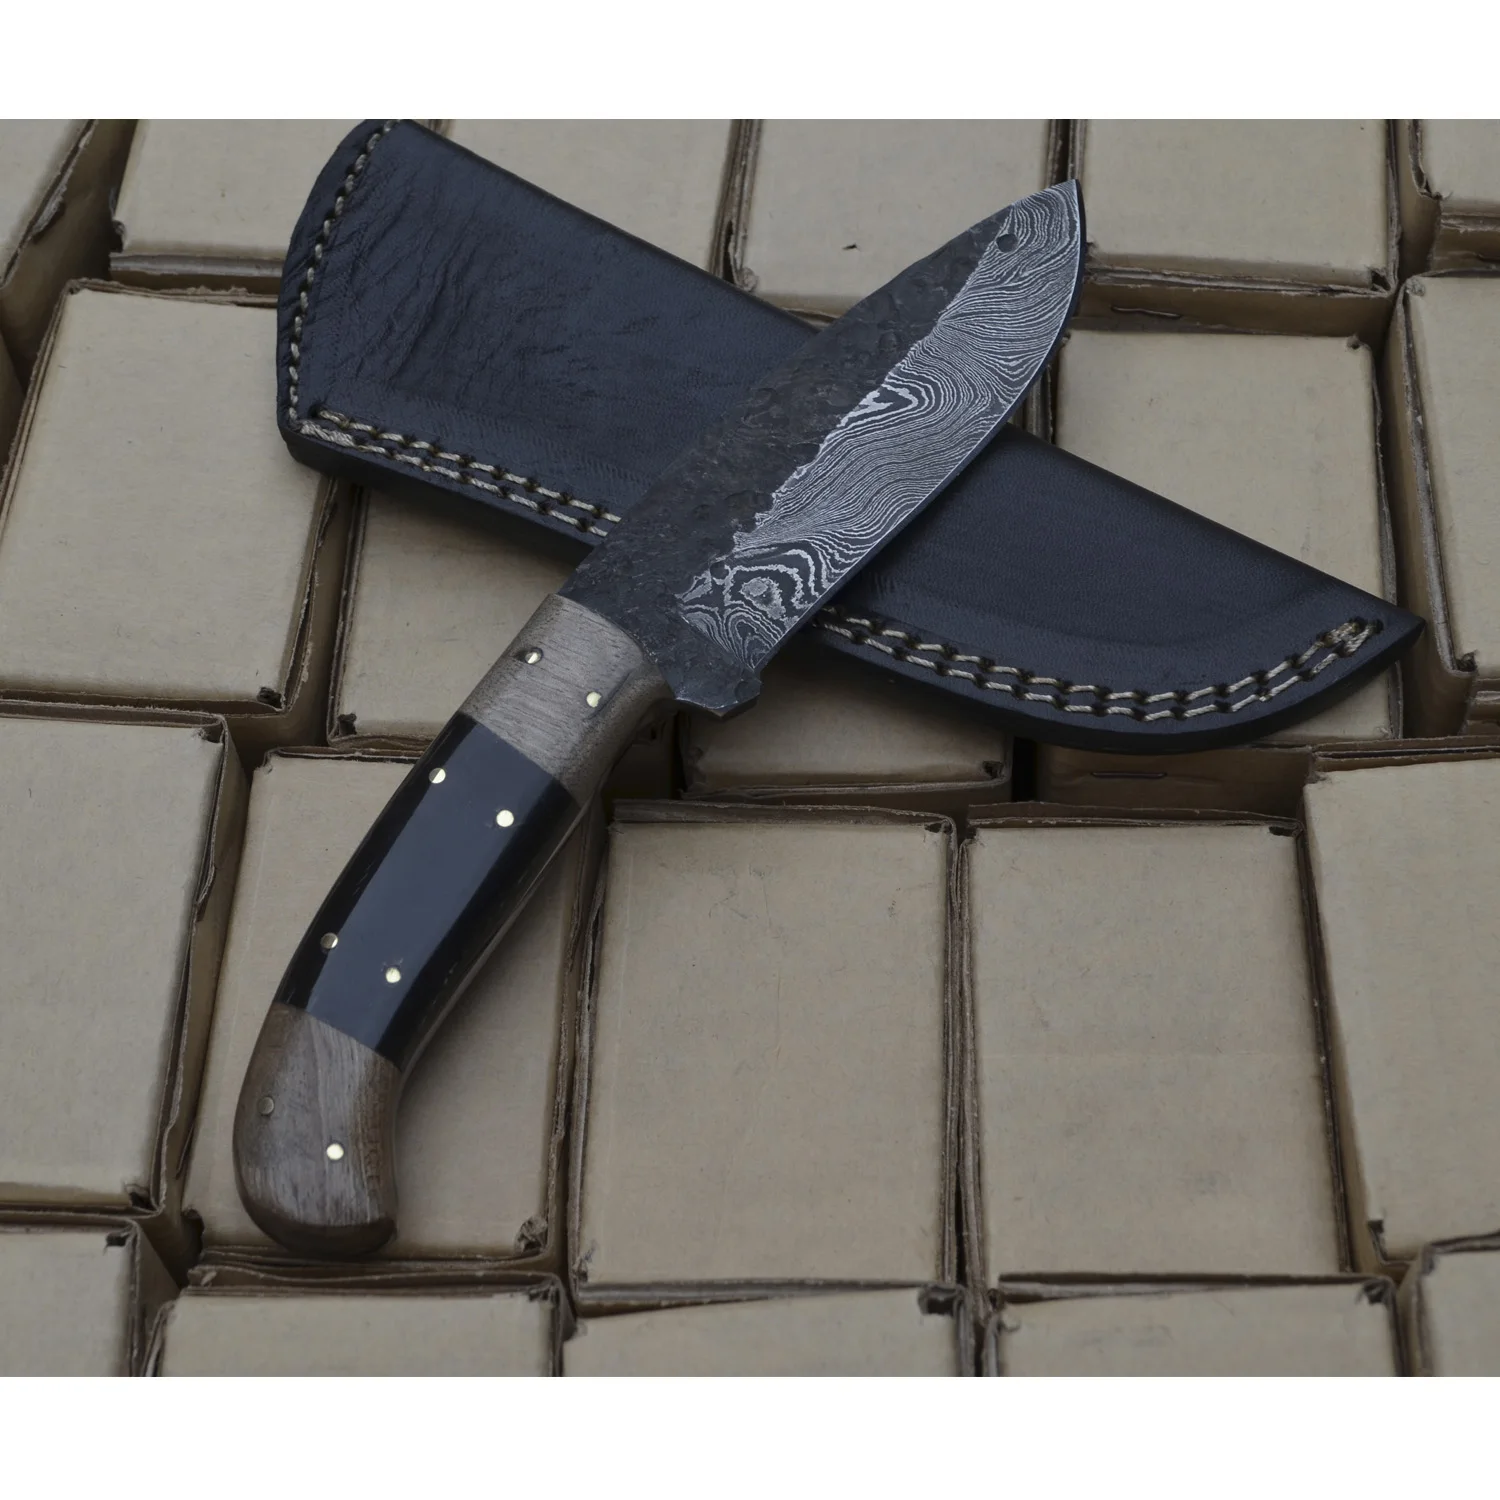 
Damascus Knife Custom Hand Hammered Damascus Hunting Knife in Buffalo horn and wood Bolster OAL 8.5 inches with Leather Sheath  (62002577710)